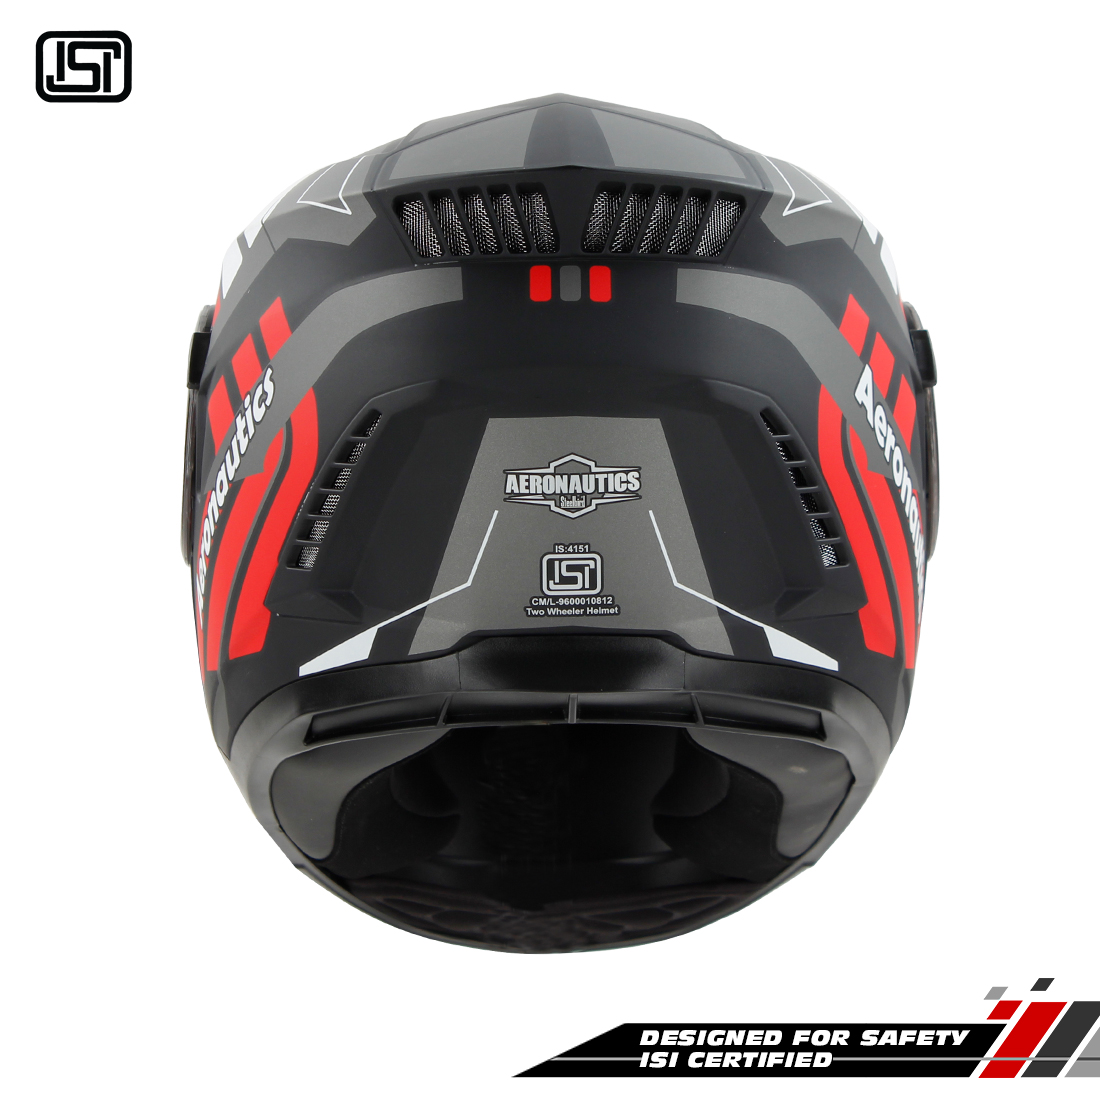 Steelbird SBH-40 Vanguard ISI Certified Full Face Graphic Helmet For Men And Women With Inner Sun Shield (Glossy Black Red)